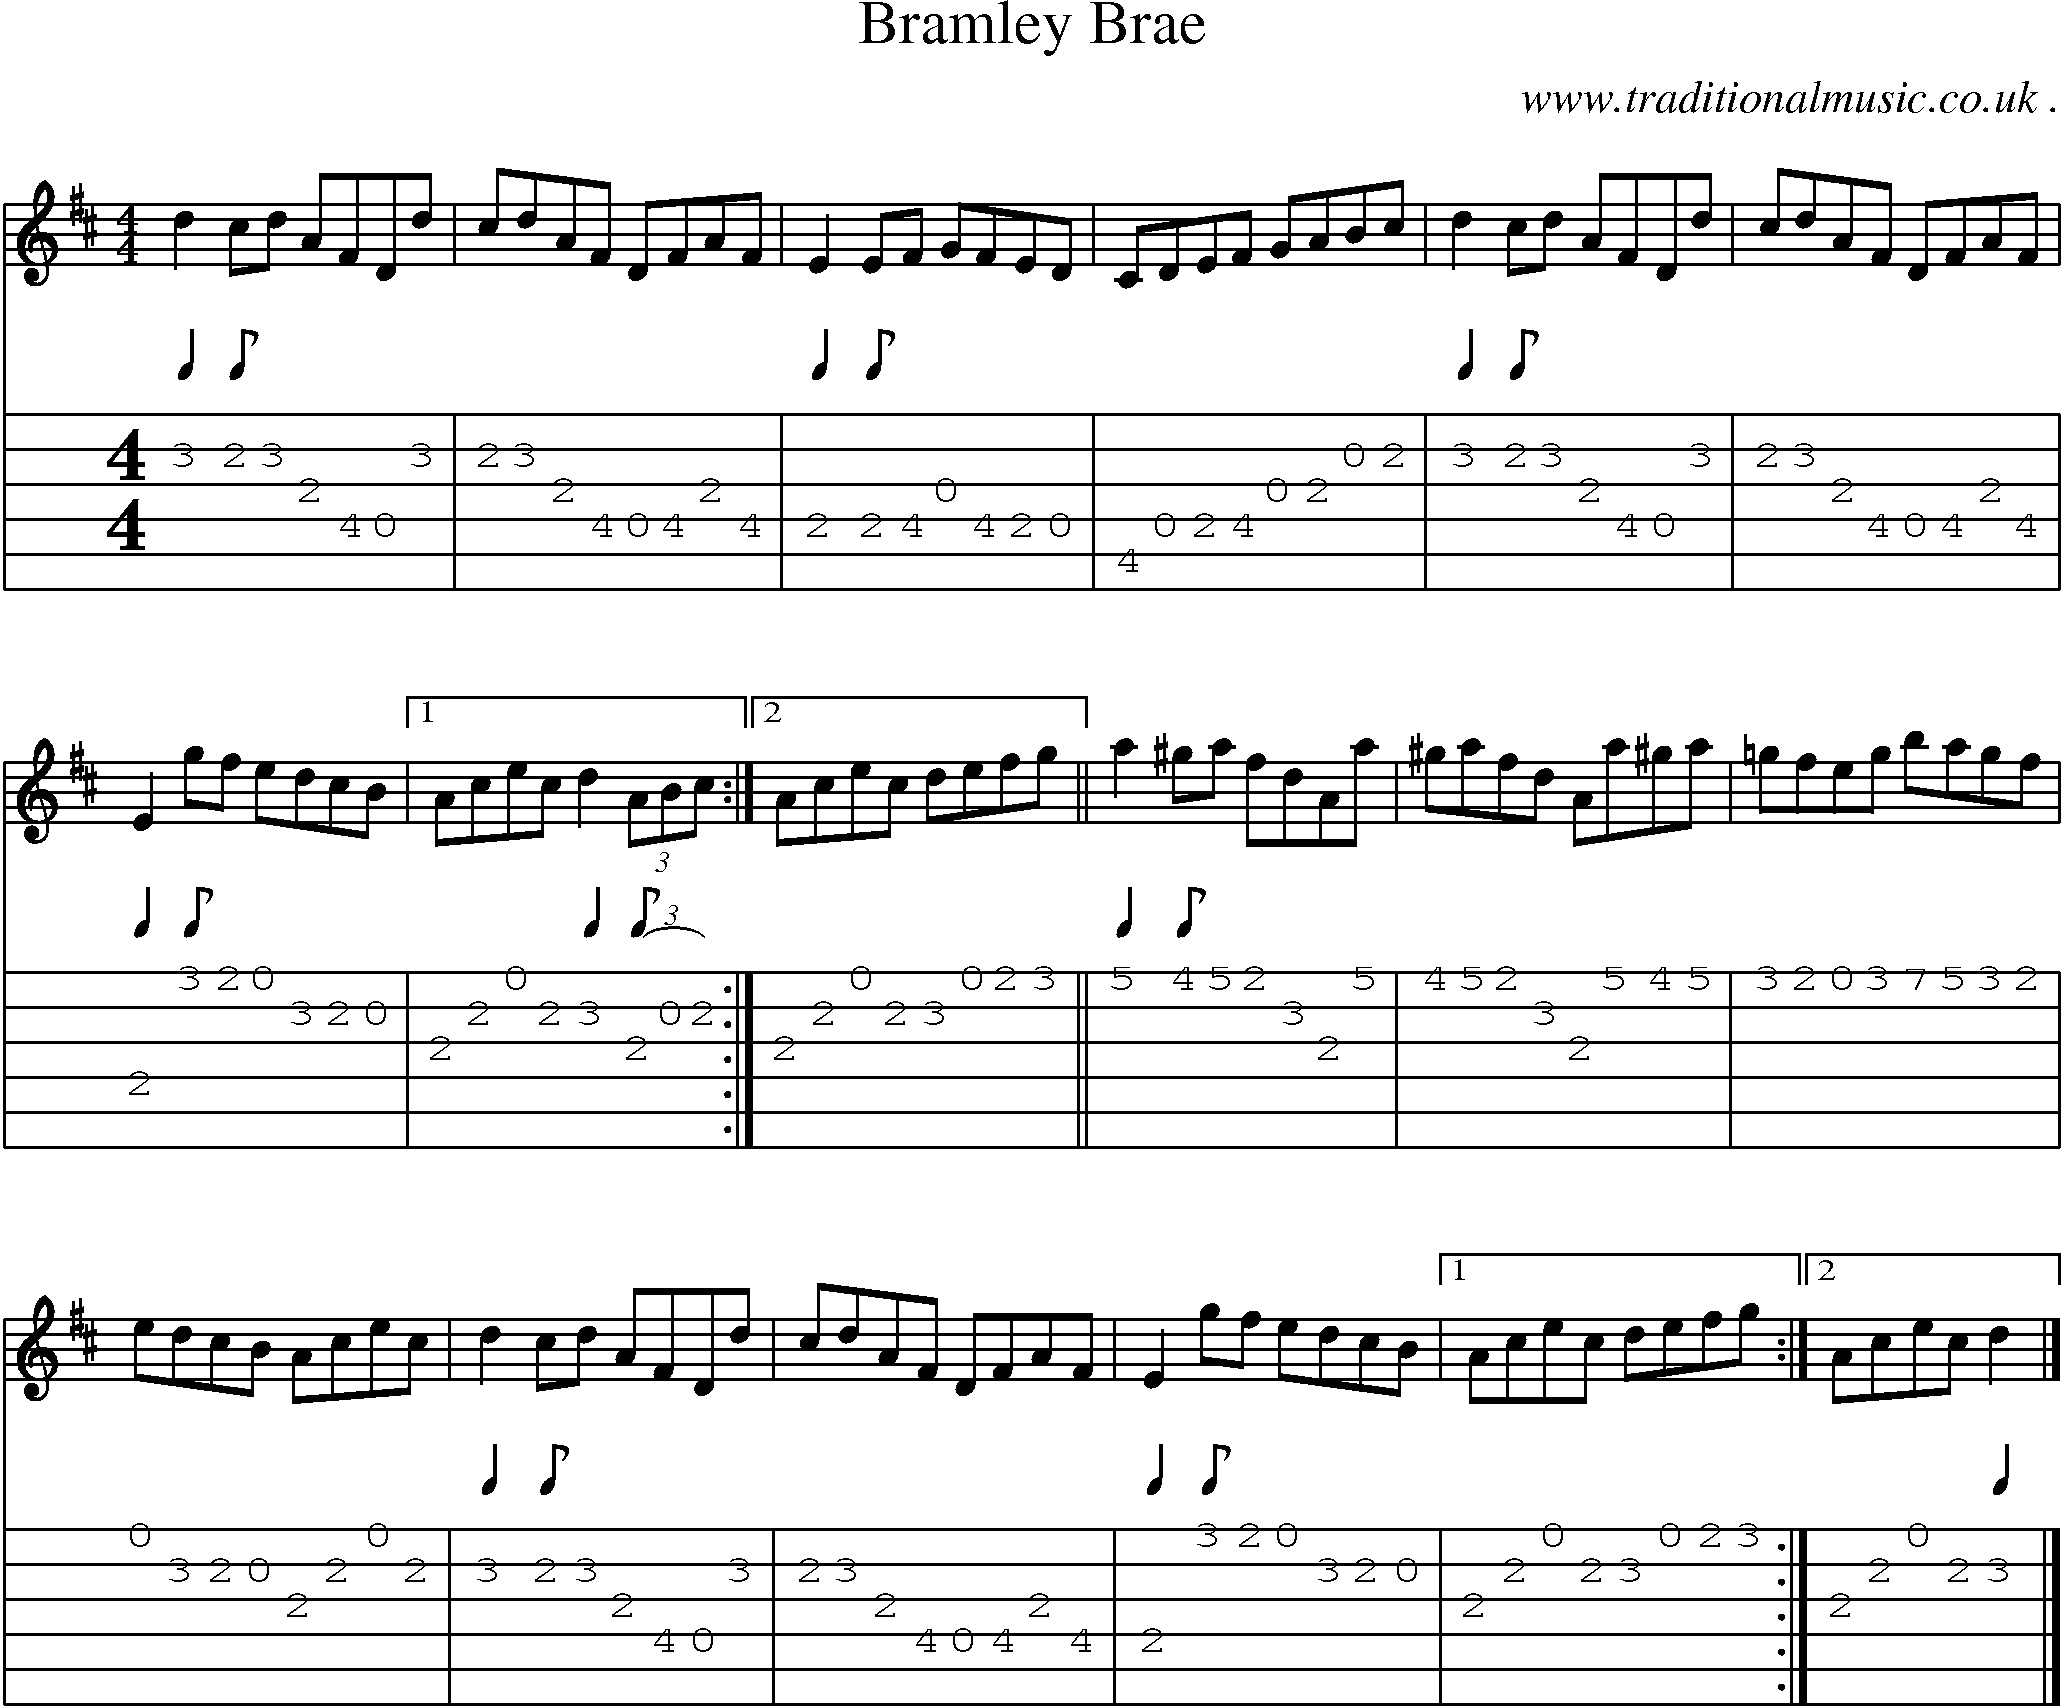 Sheet-music  score, Chords and Guitar Tabs for Bramley Brae